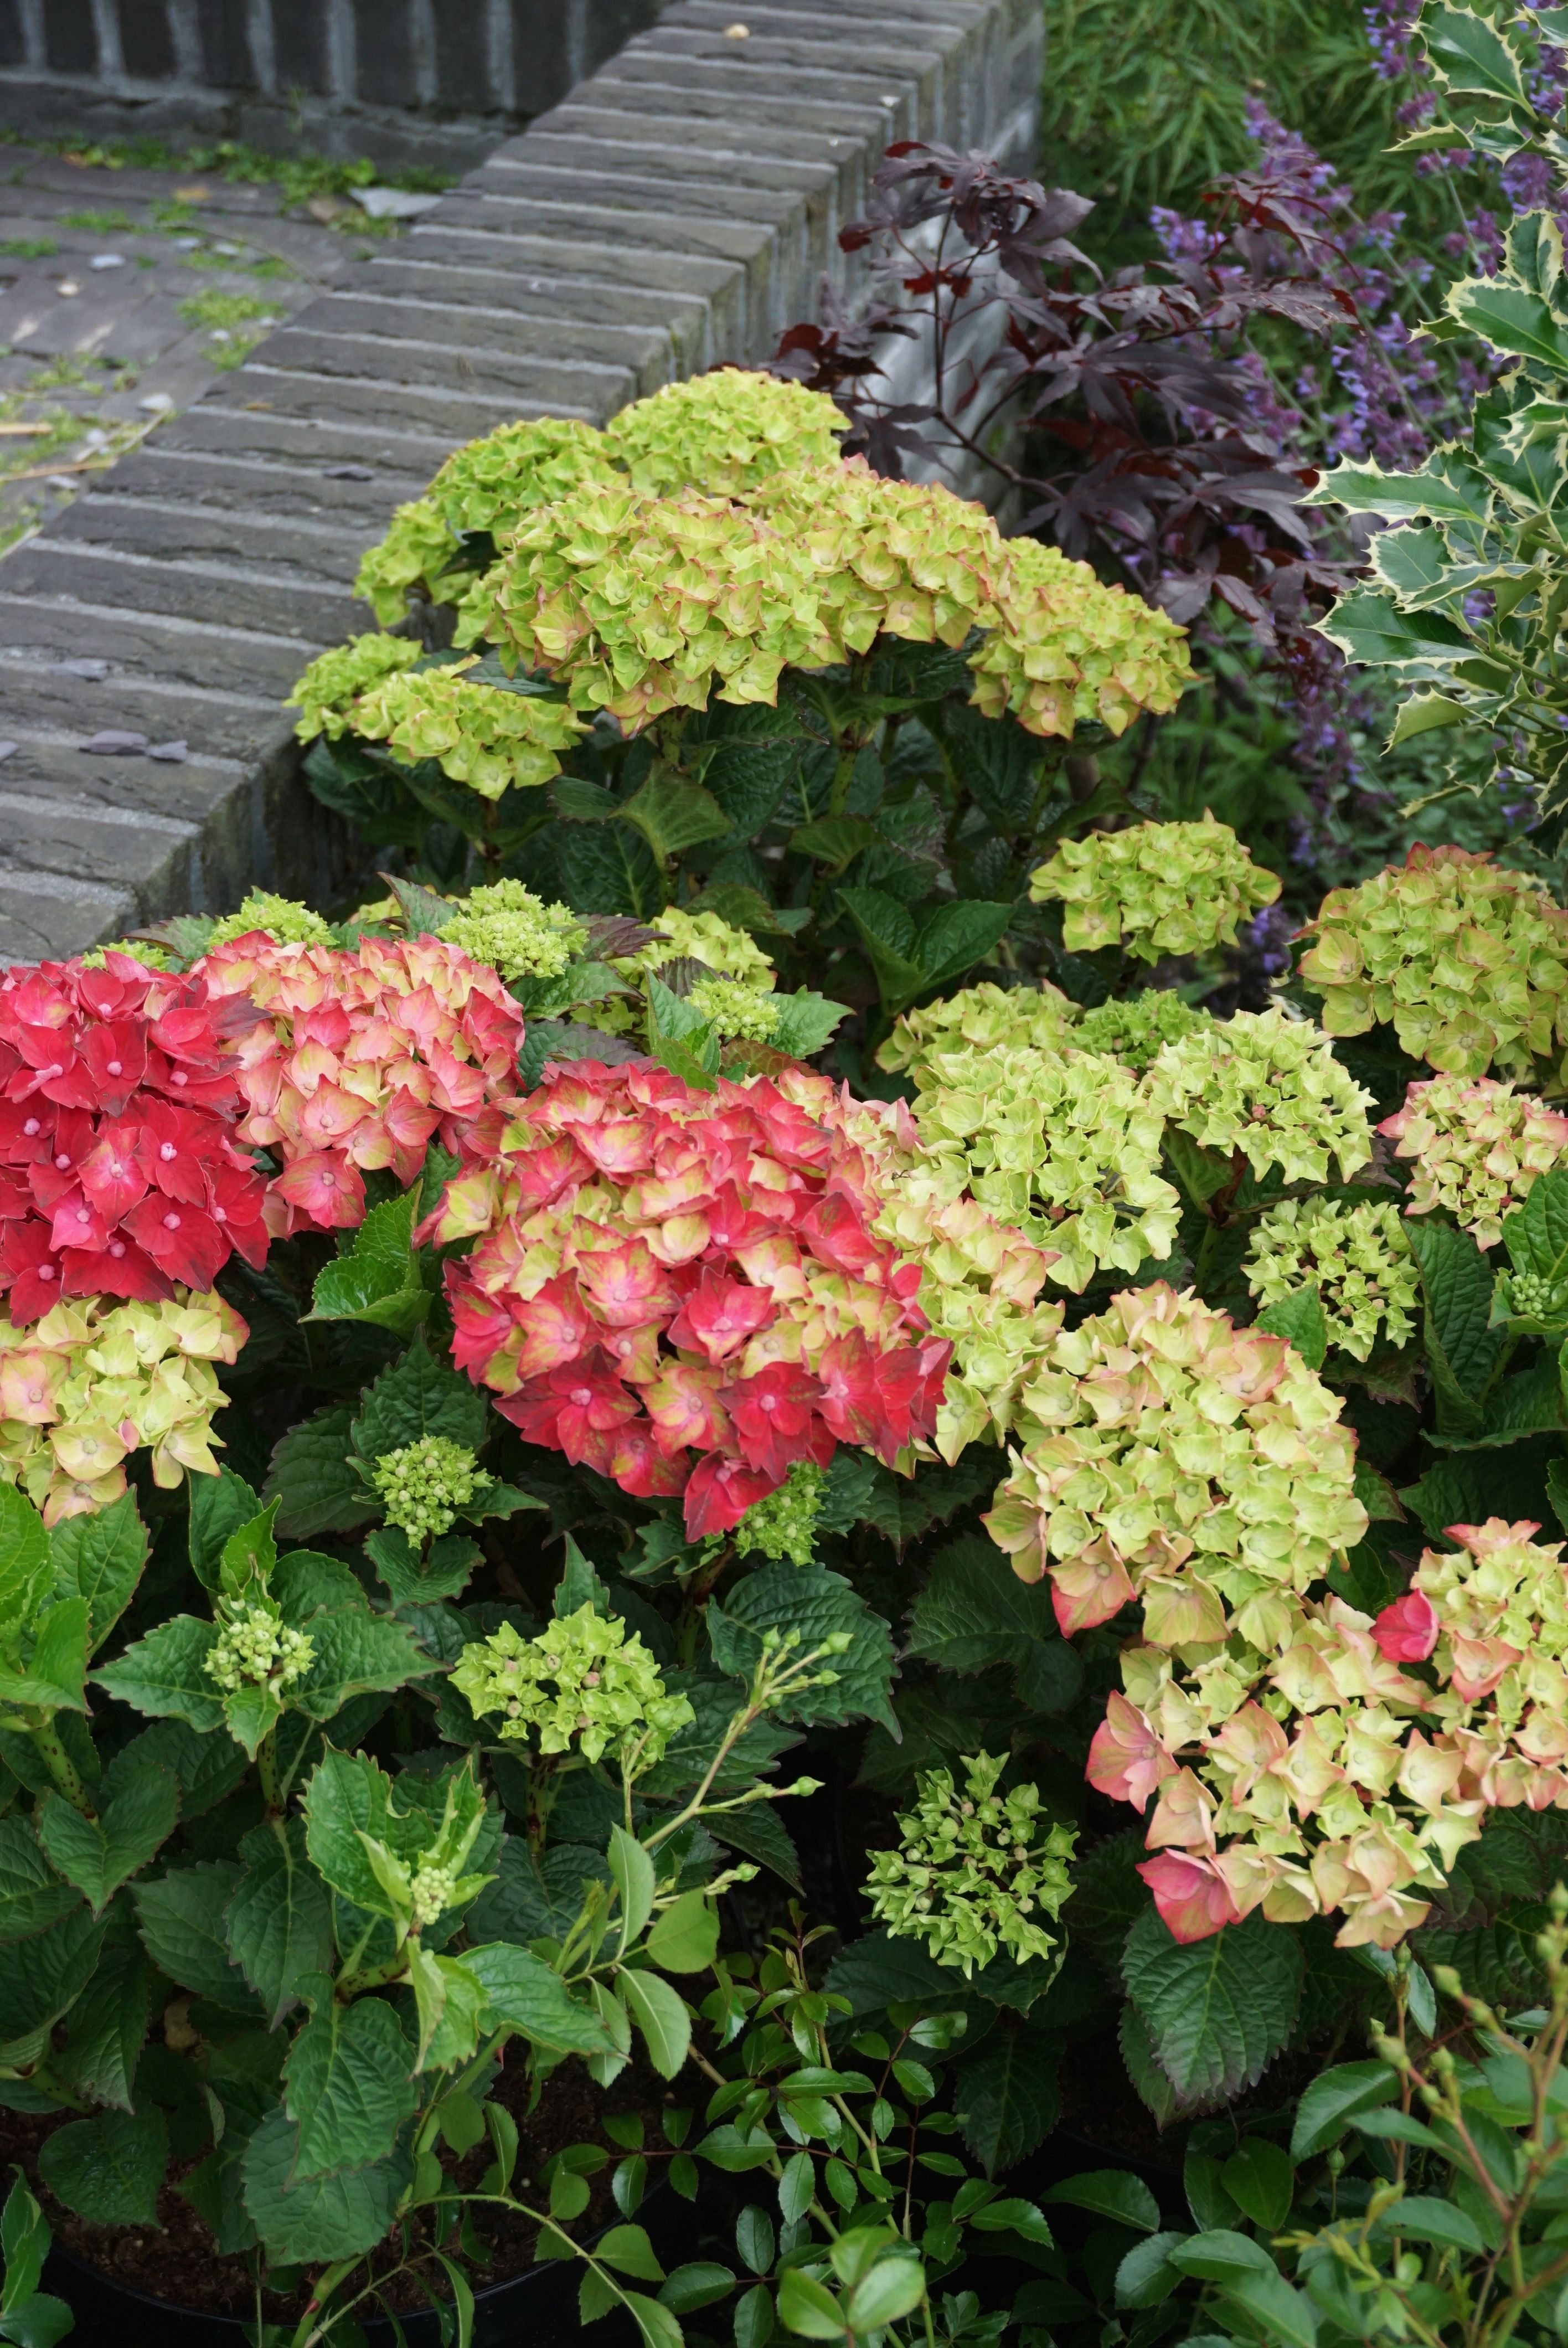 images/plants/hydrangea/hyd-magical-everlasting-crimson/hyd-magical-everlasting-crimson-0015.jpg